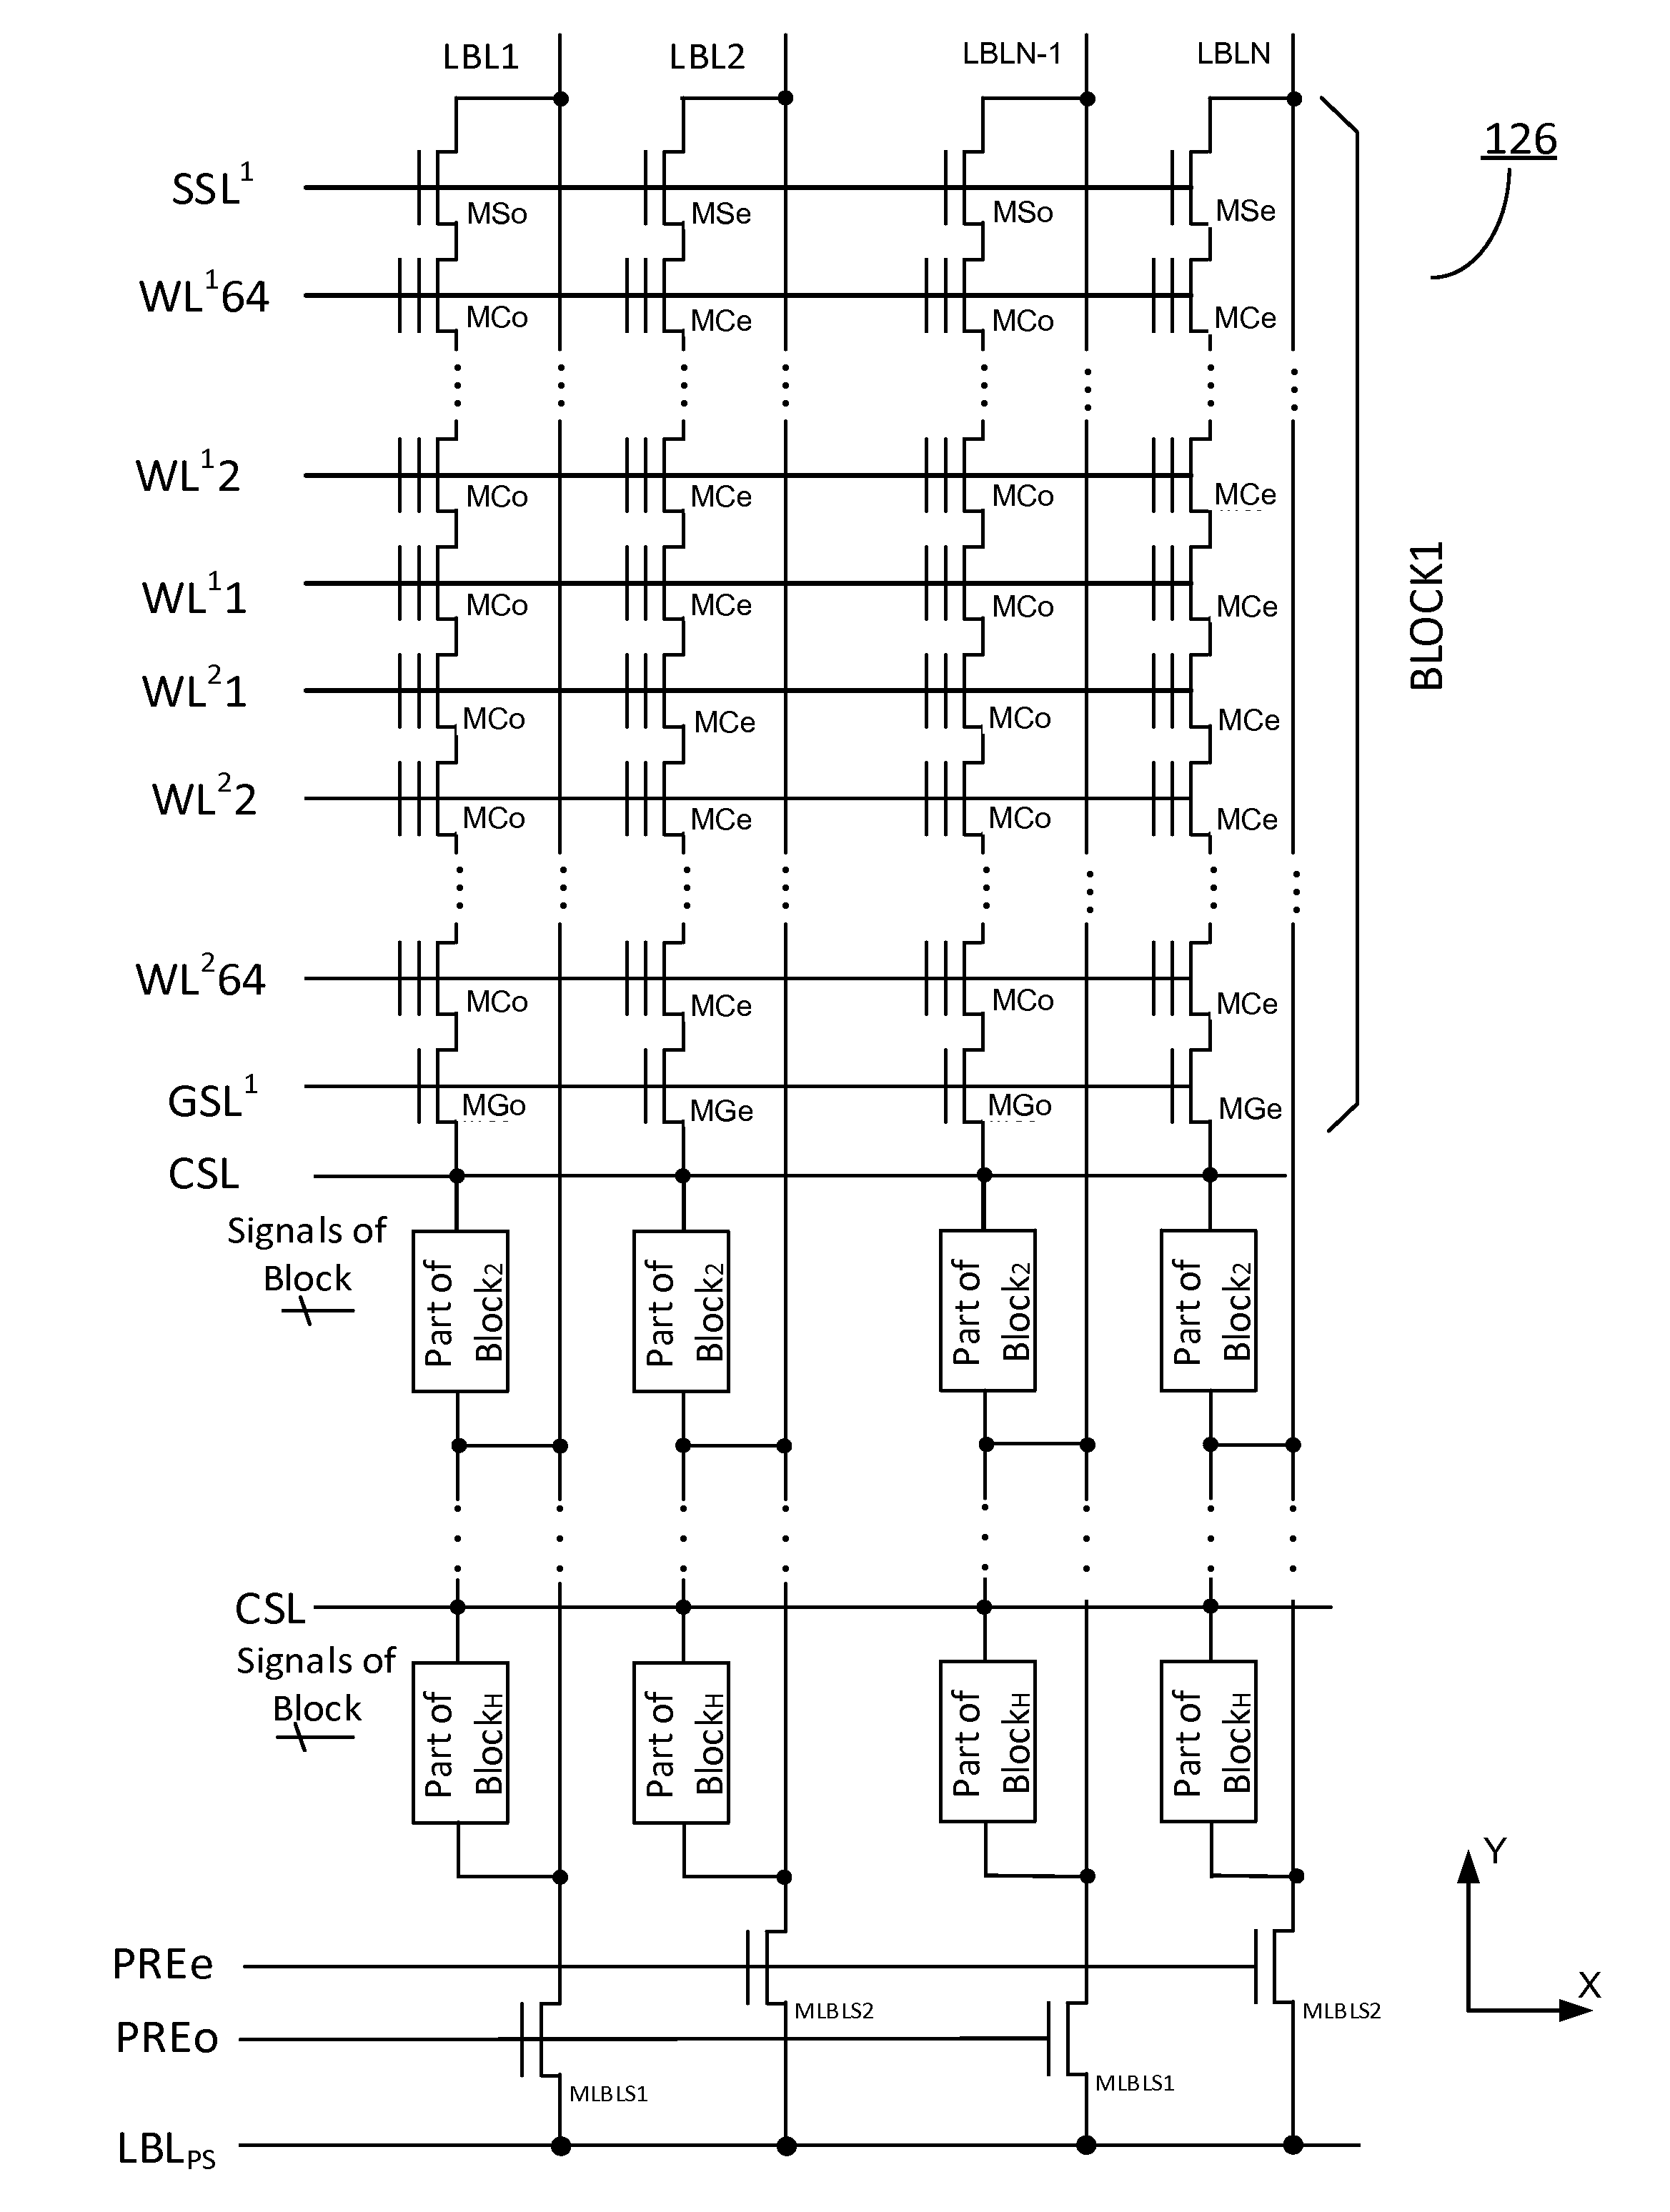 Self-timed slc NAND pipeline and concurrent program without verification